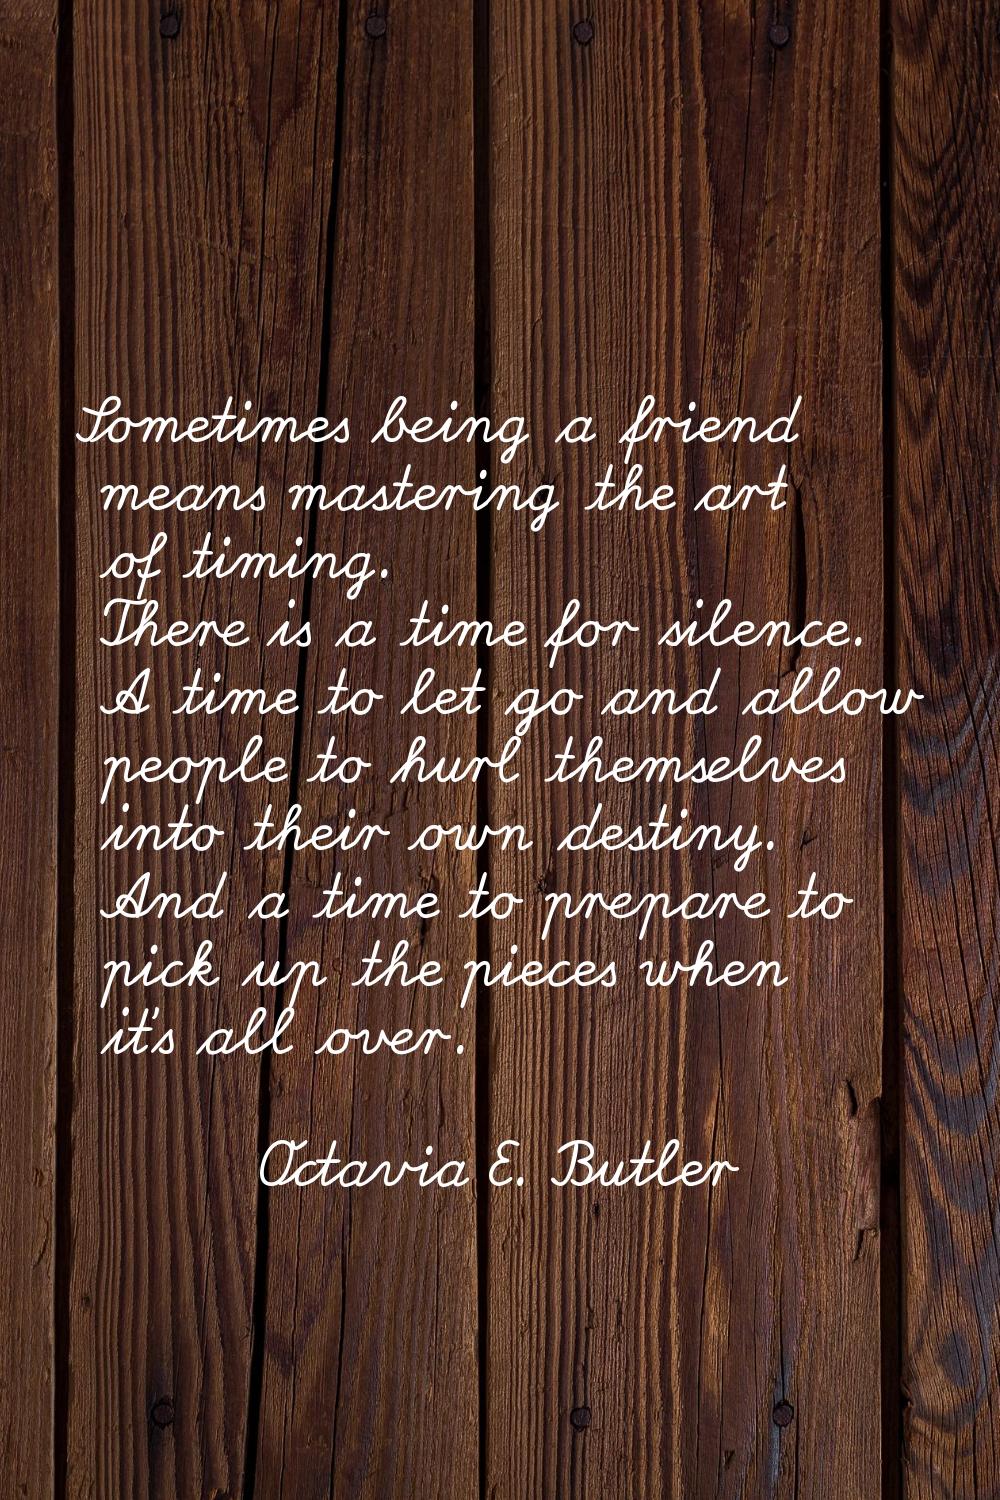 Sometimes being a friend means mastering the art of timing. There is a time for silence. A time to 